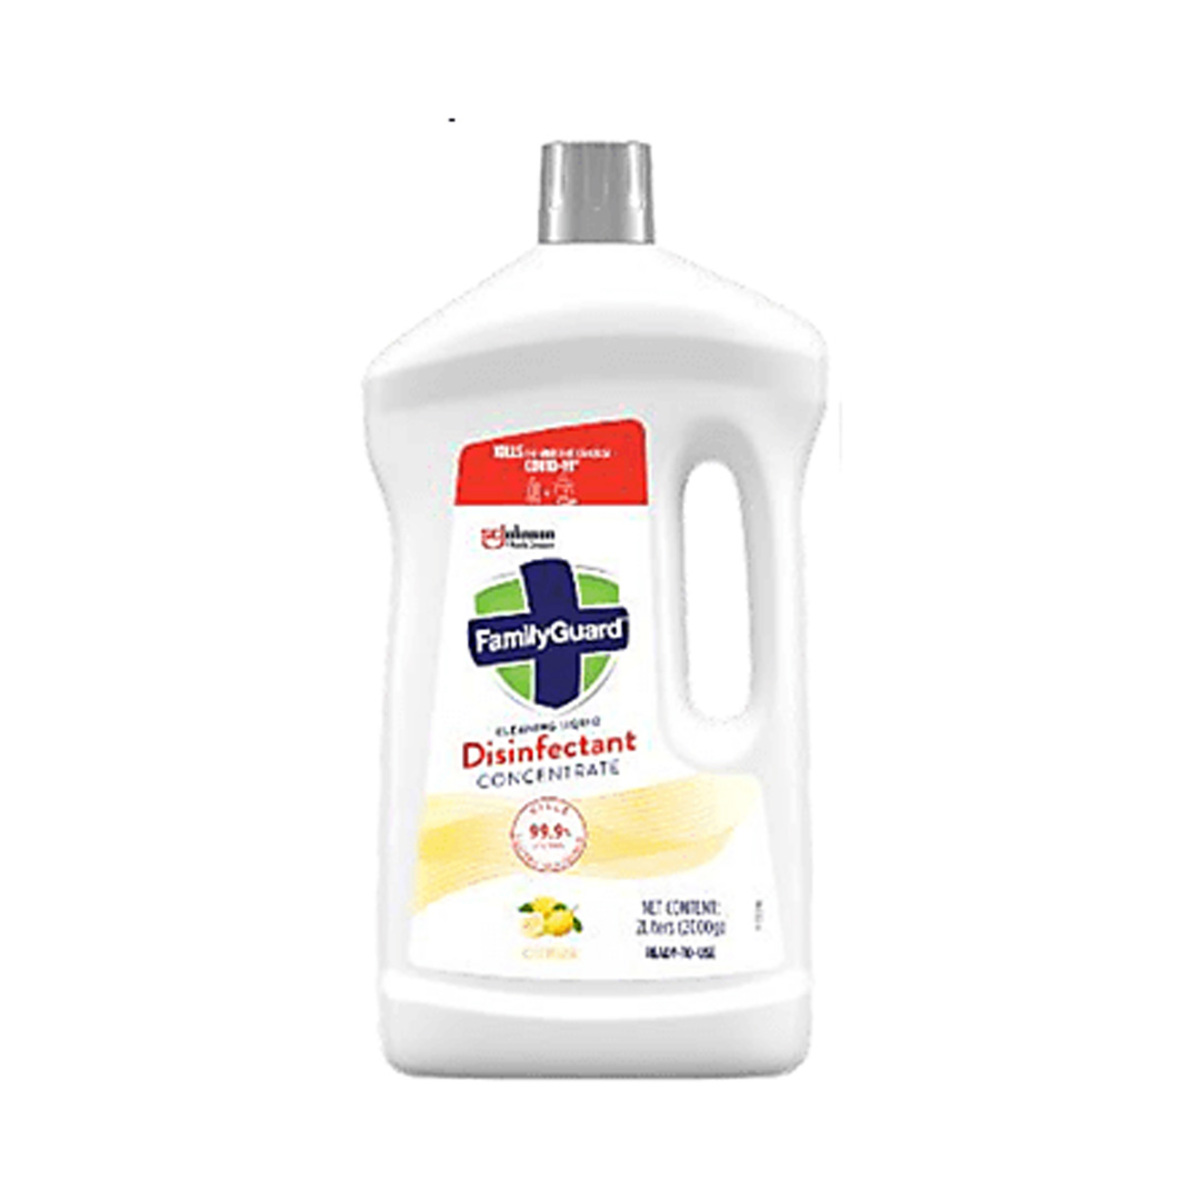 Family Guard Disinfectant Concentrate Citrus 1Liter